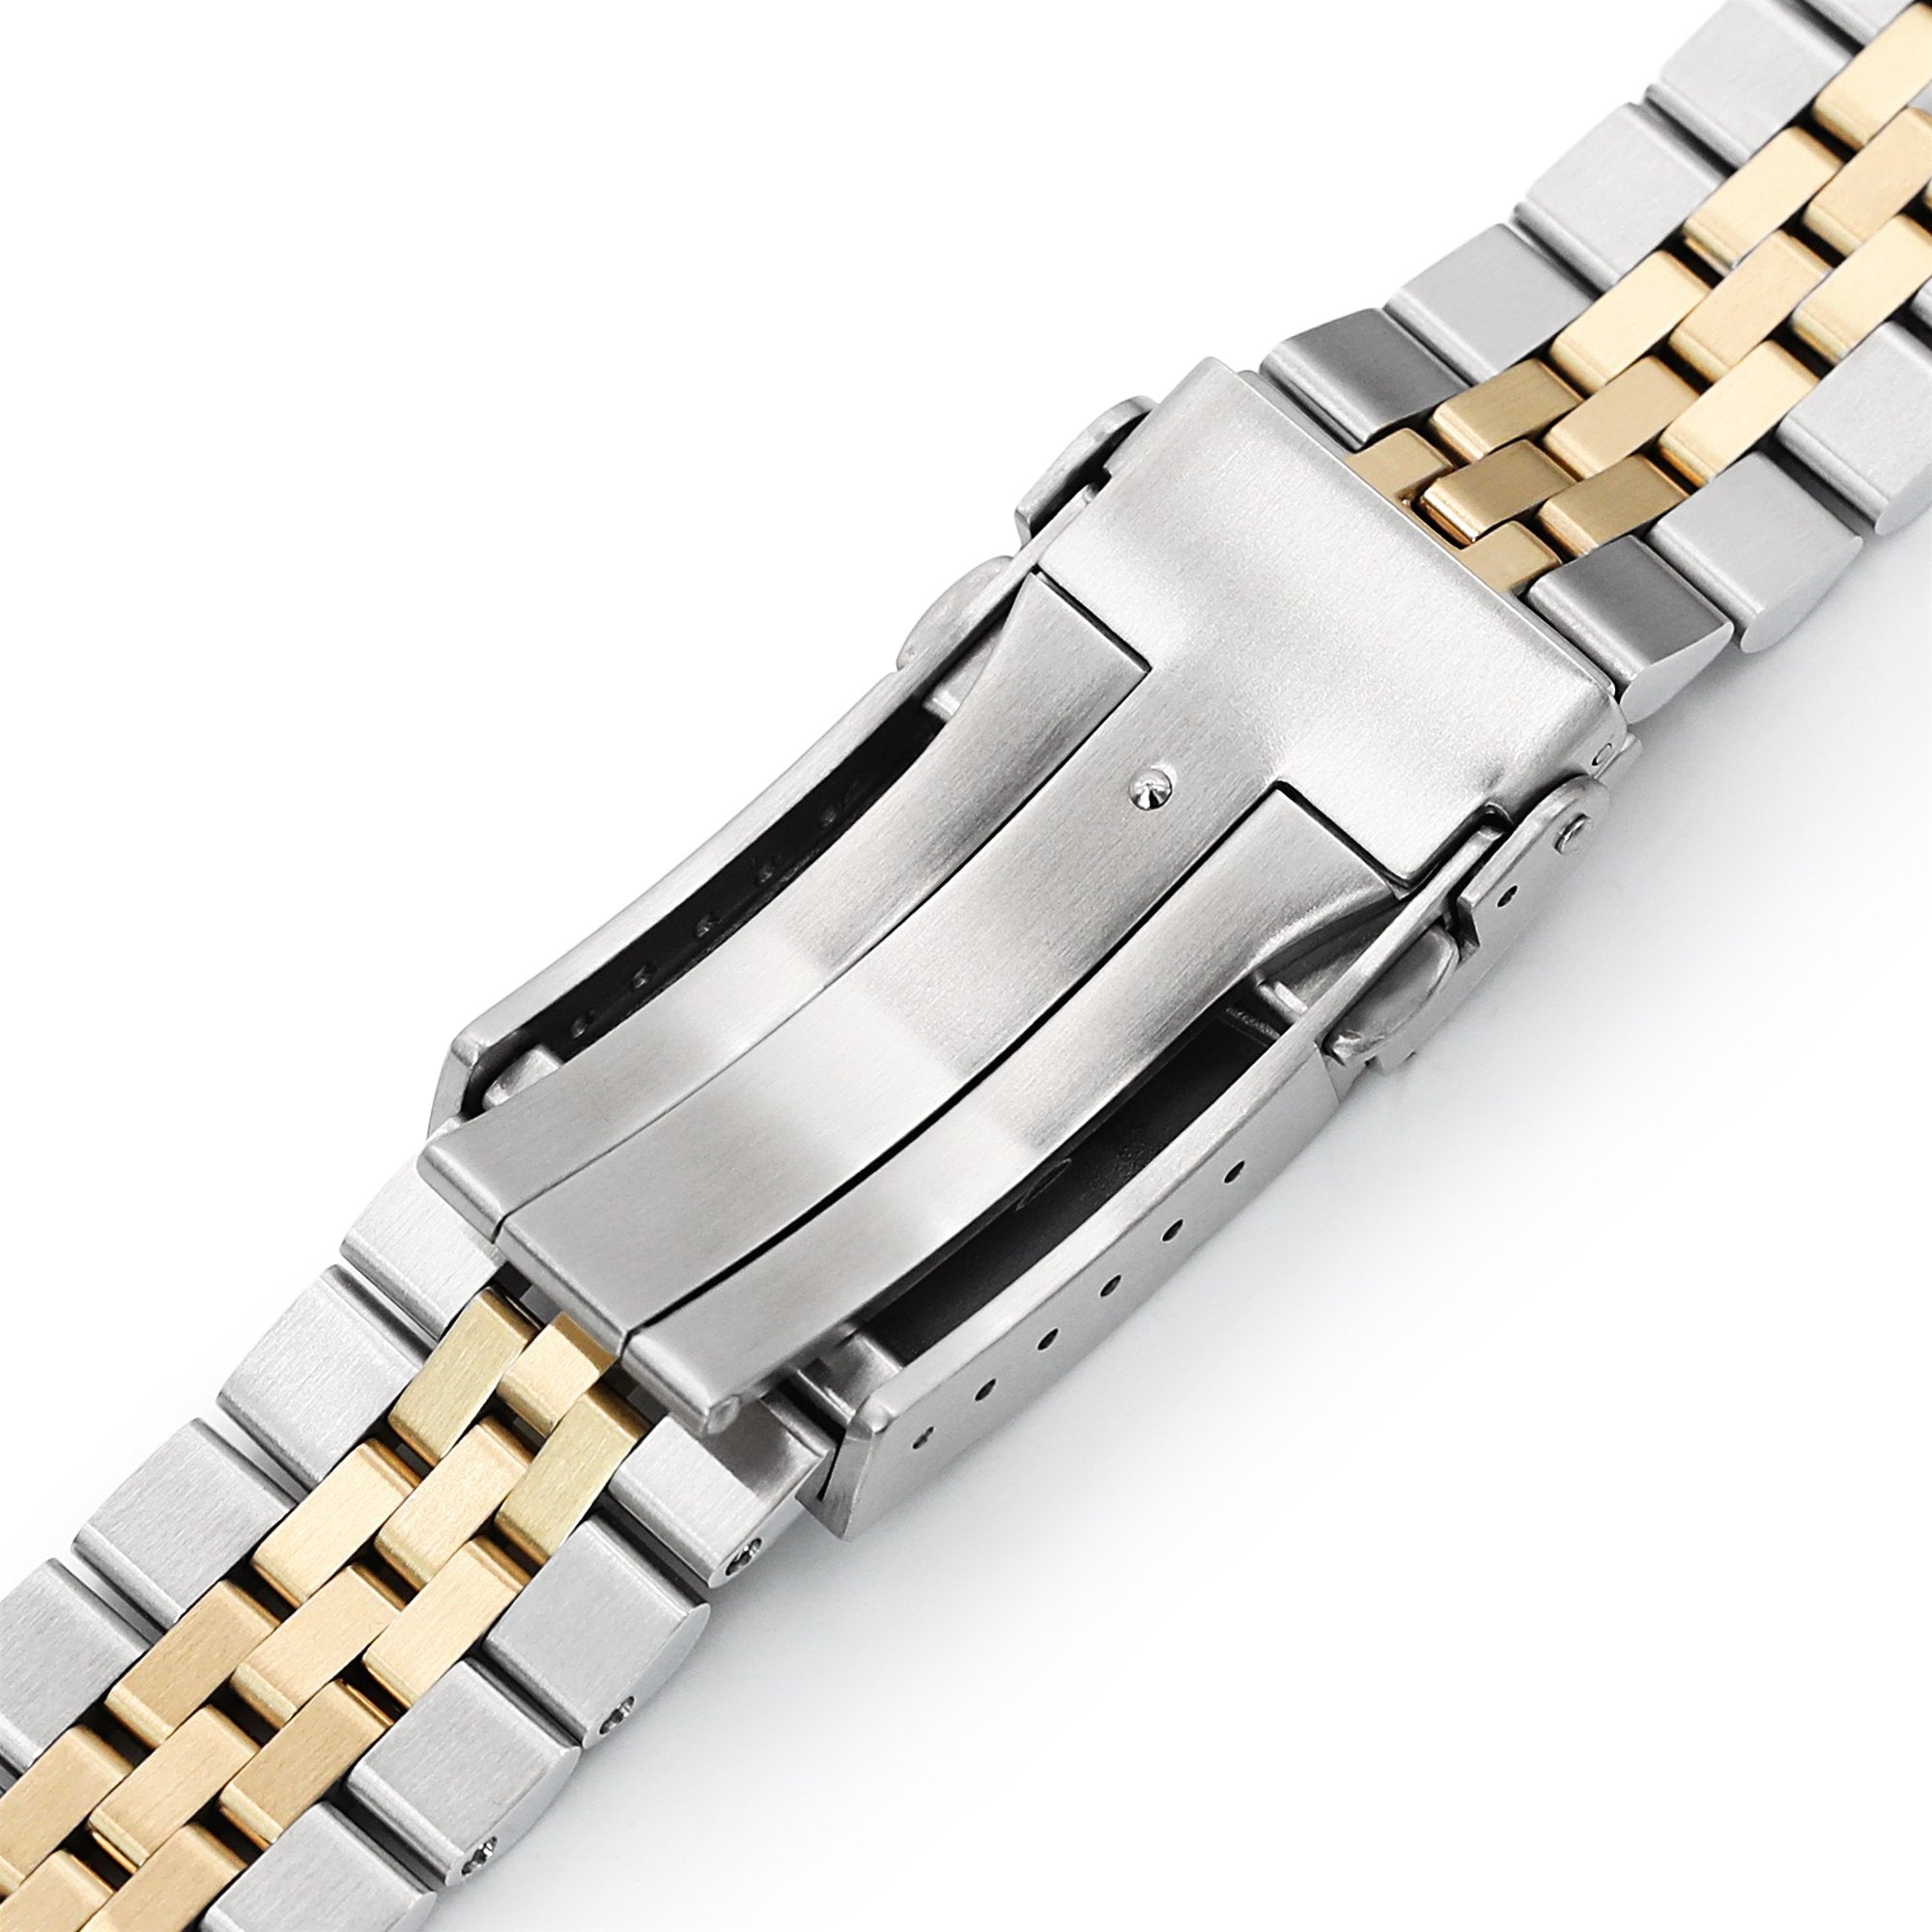 22mm Super-J Louis JUB 316L Stainless Steel Watch Bracelet for Seiko New Turtles SRP777, Two Tone IP Gold SUB Clasp Strapcode Watch Bands